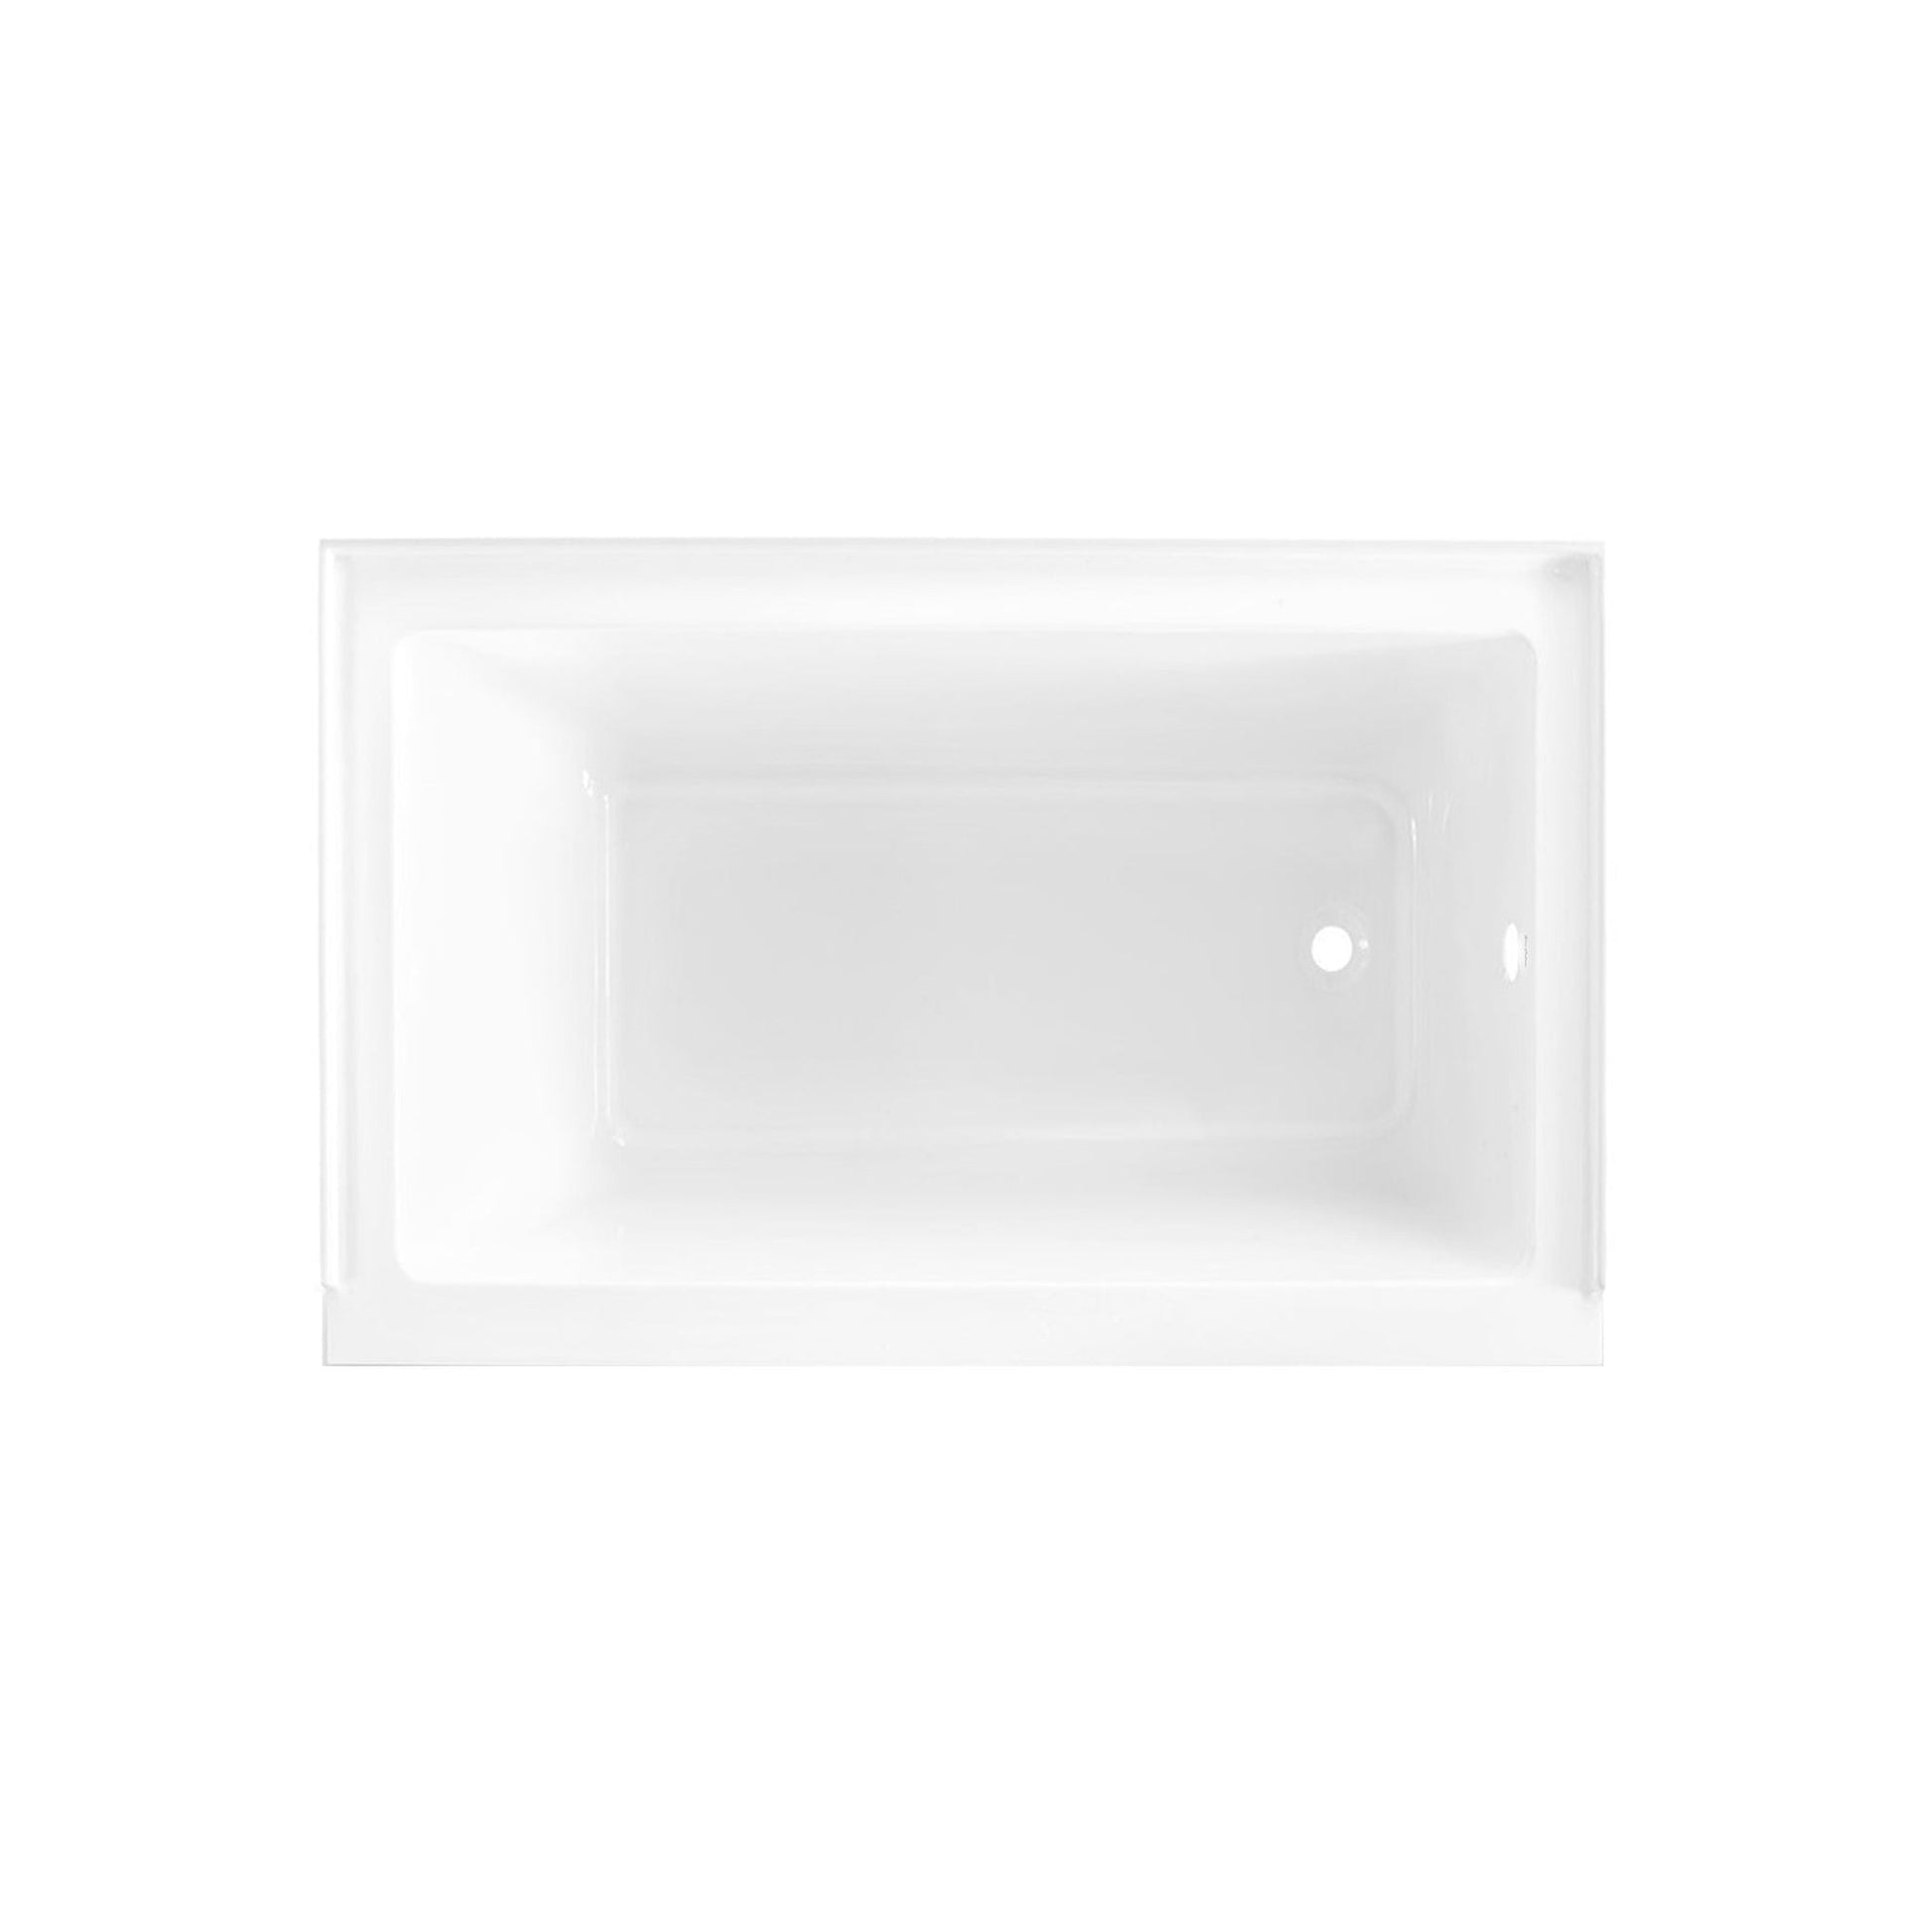 Swiss Madison Voltaire 48" x 32" Glossy White Right-Hand Drain Alcove Bathtub With Built-In Flange & Adjustable Feet